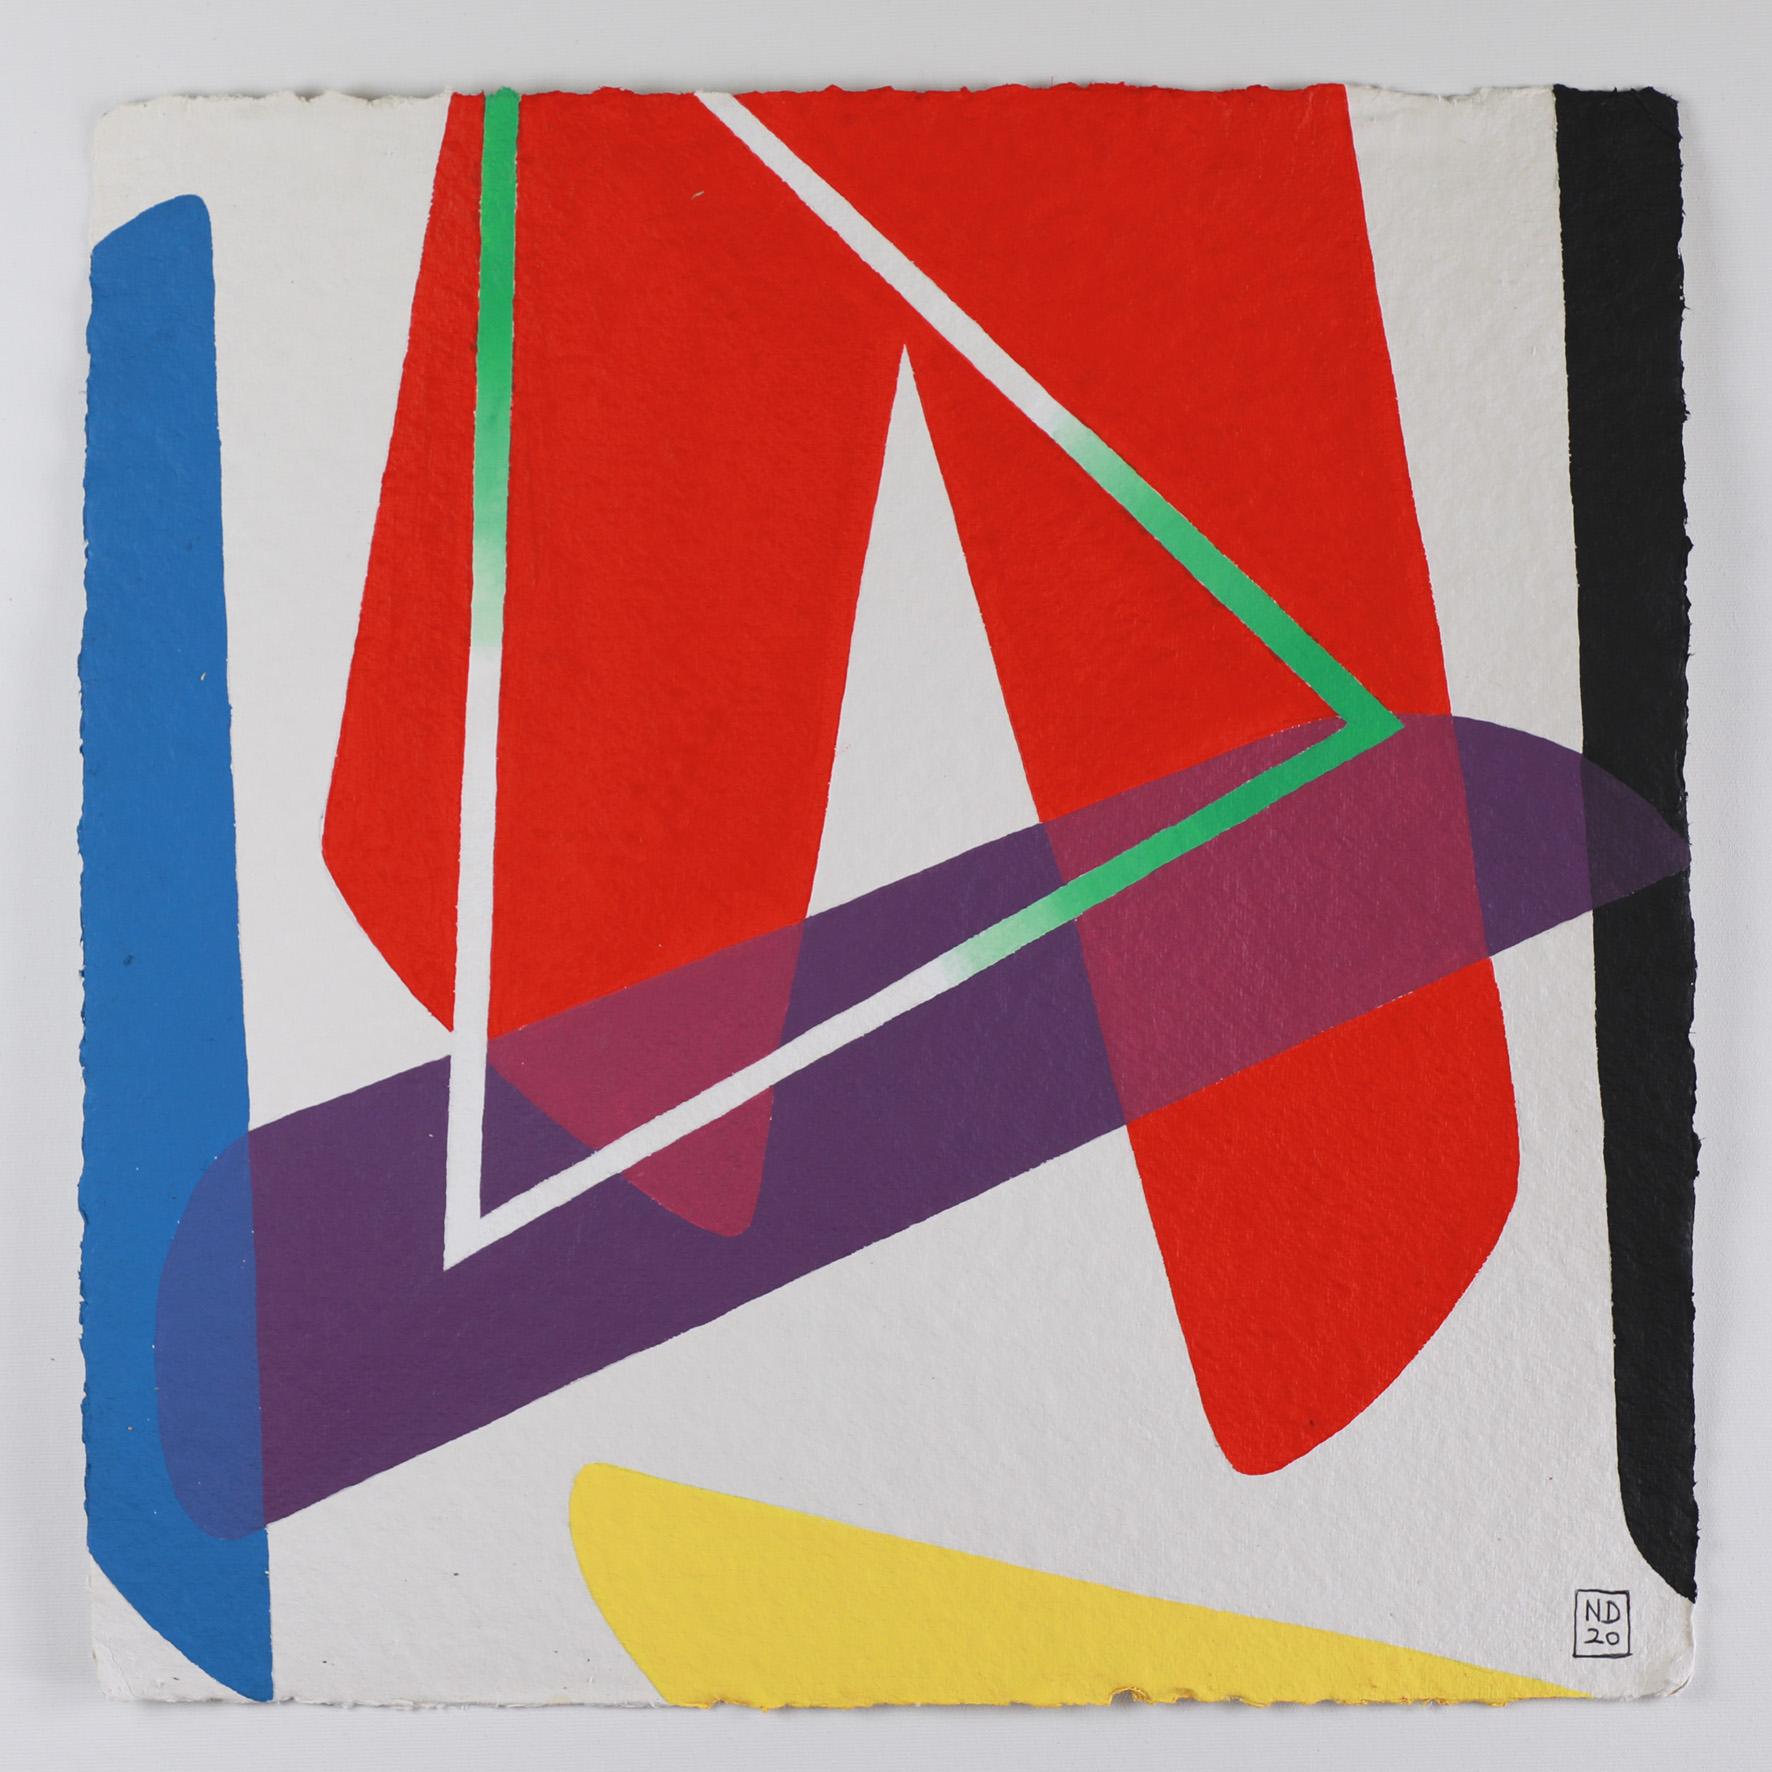 Colorful abstraction by Nicolas Dubreuille : "Ref 588"

Nicolas Dubreuille is a multi-faceted abstract artist who likes to multiply mediums - sculpture, painting, drawing, photography - to explore form and colour. His artworks relate to minimalism,